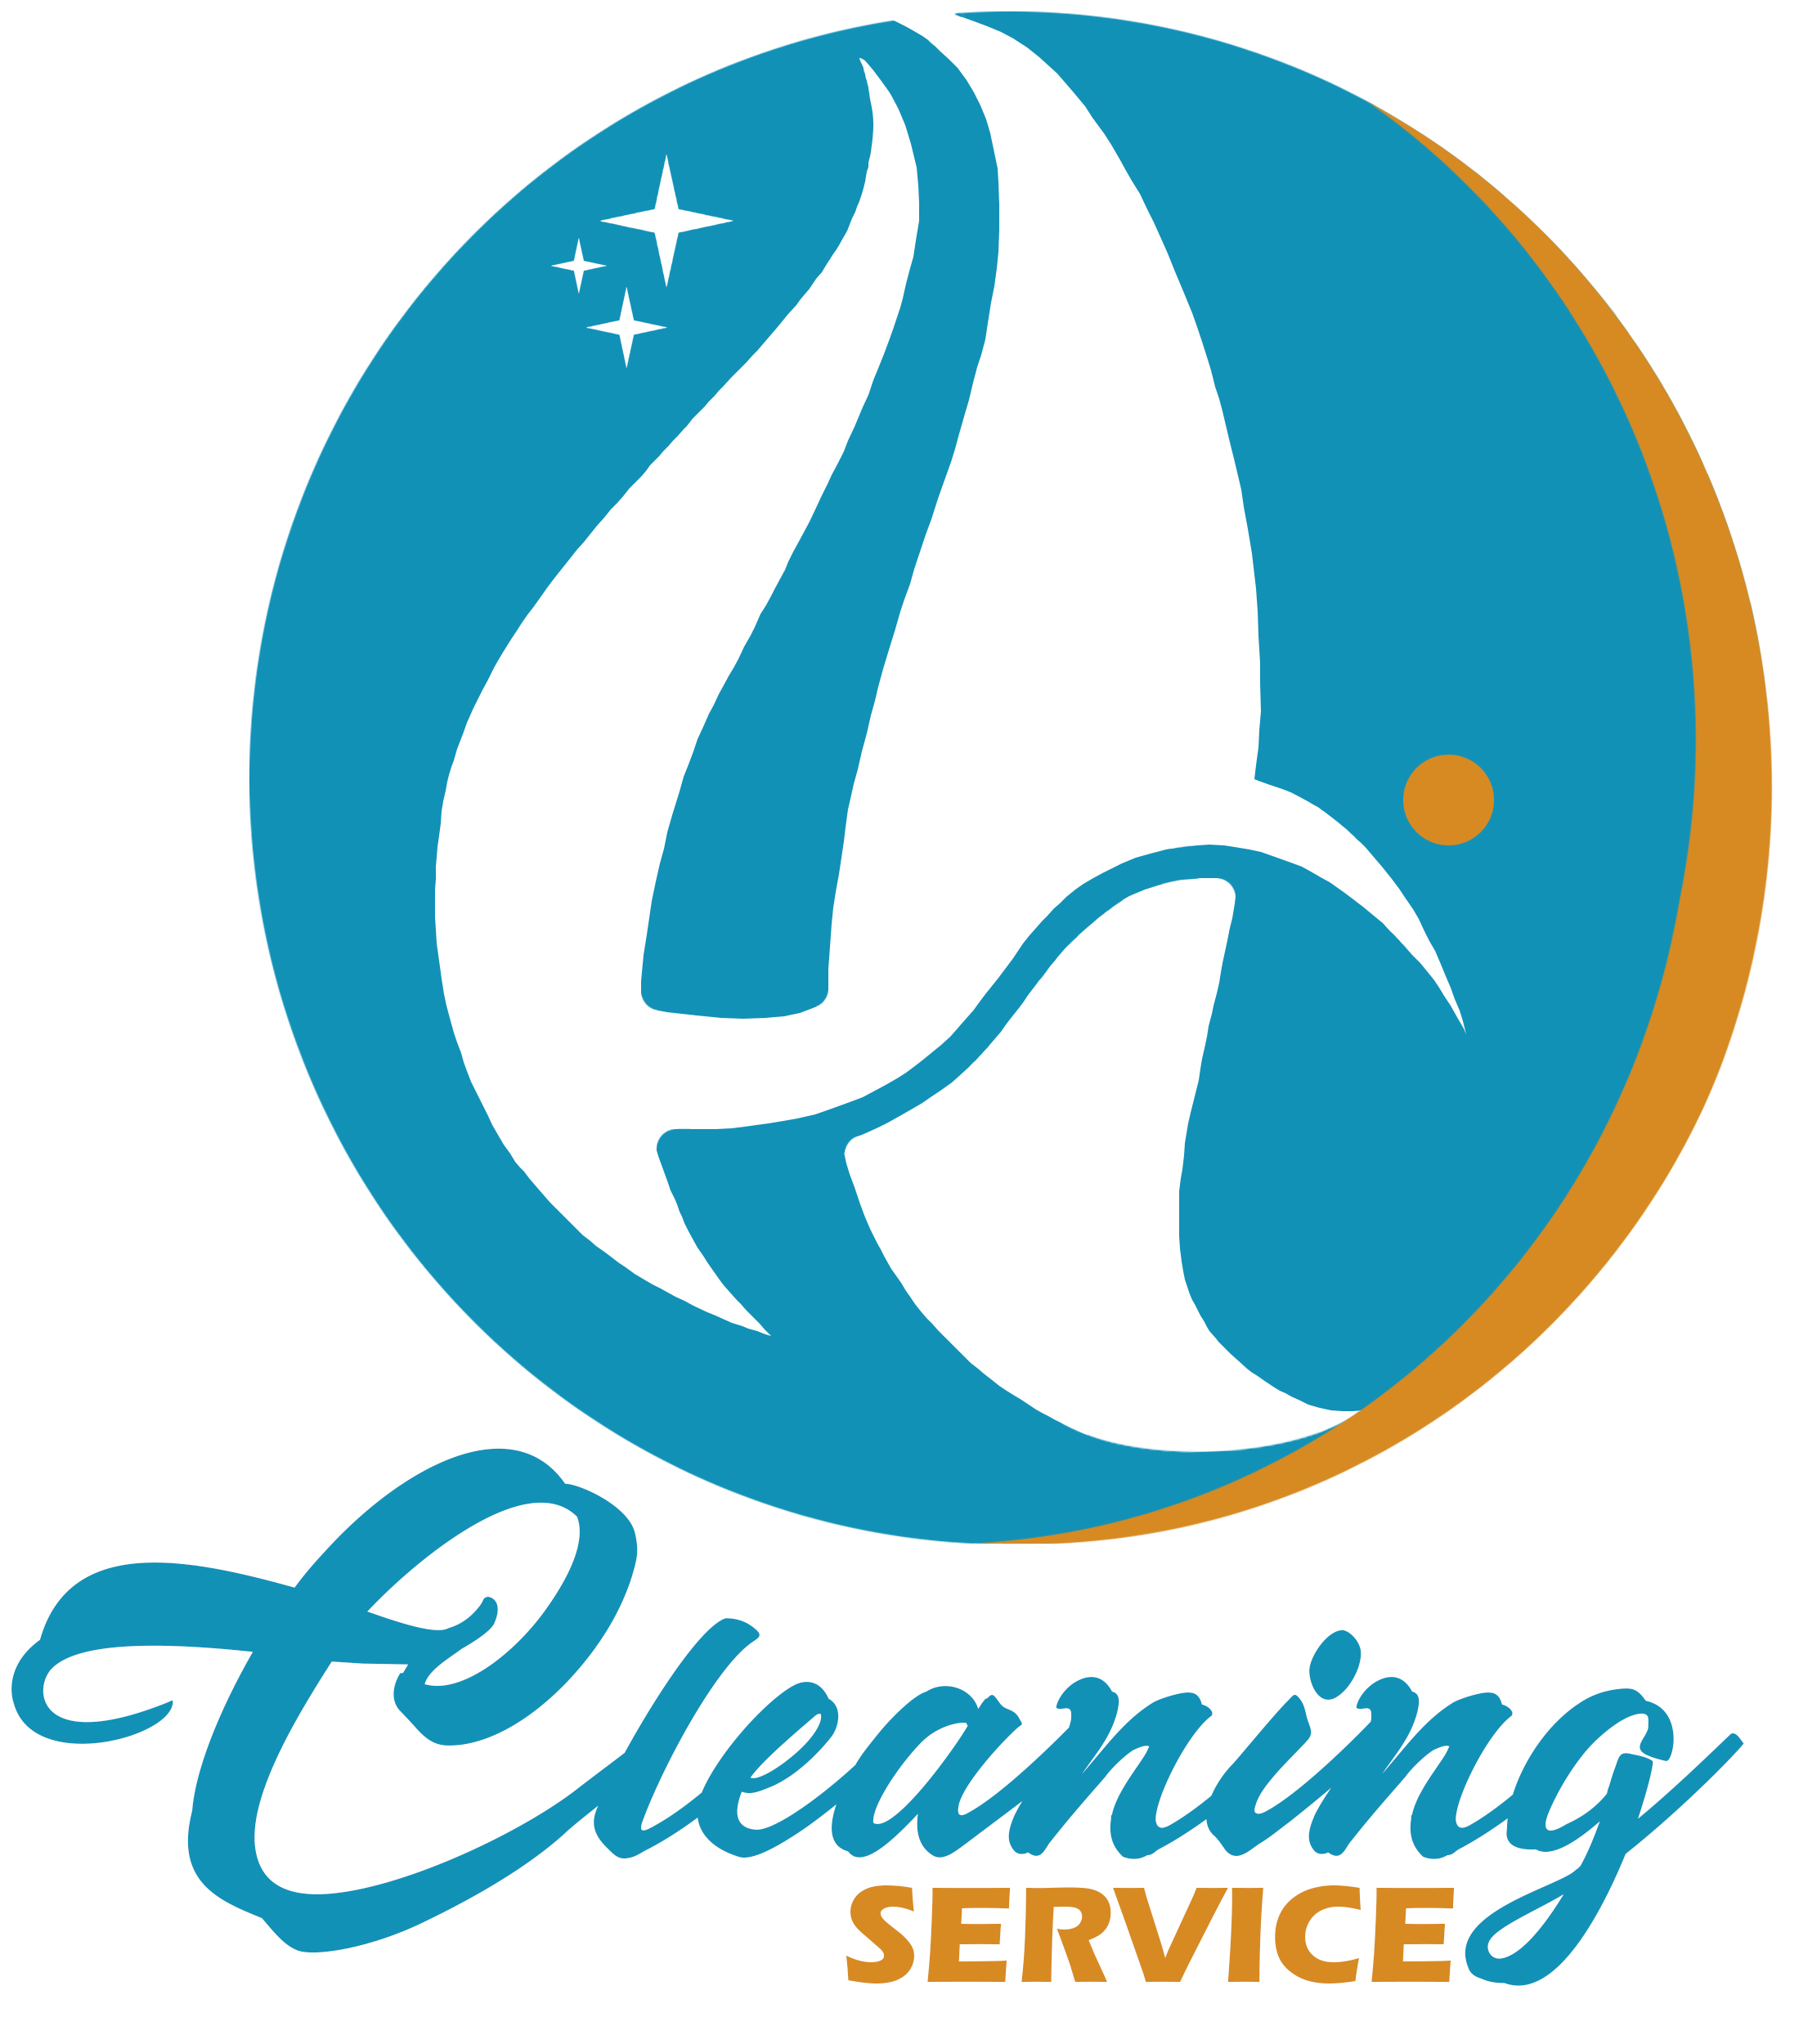 Logo of Alich Cleaning Services LTD Commercial Cleaning And Facilities Management Services In Swindon, Wiltshire